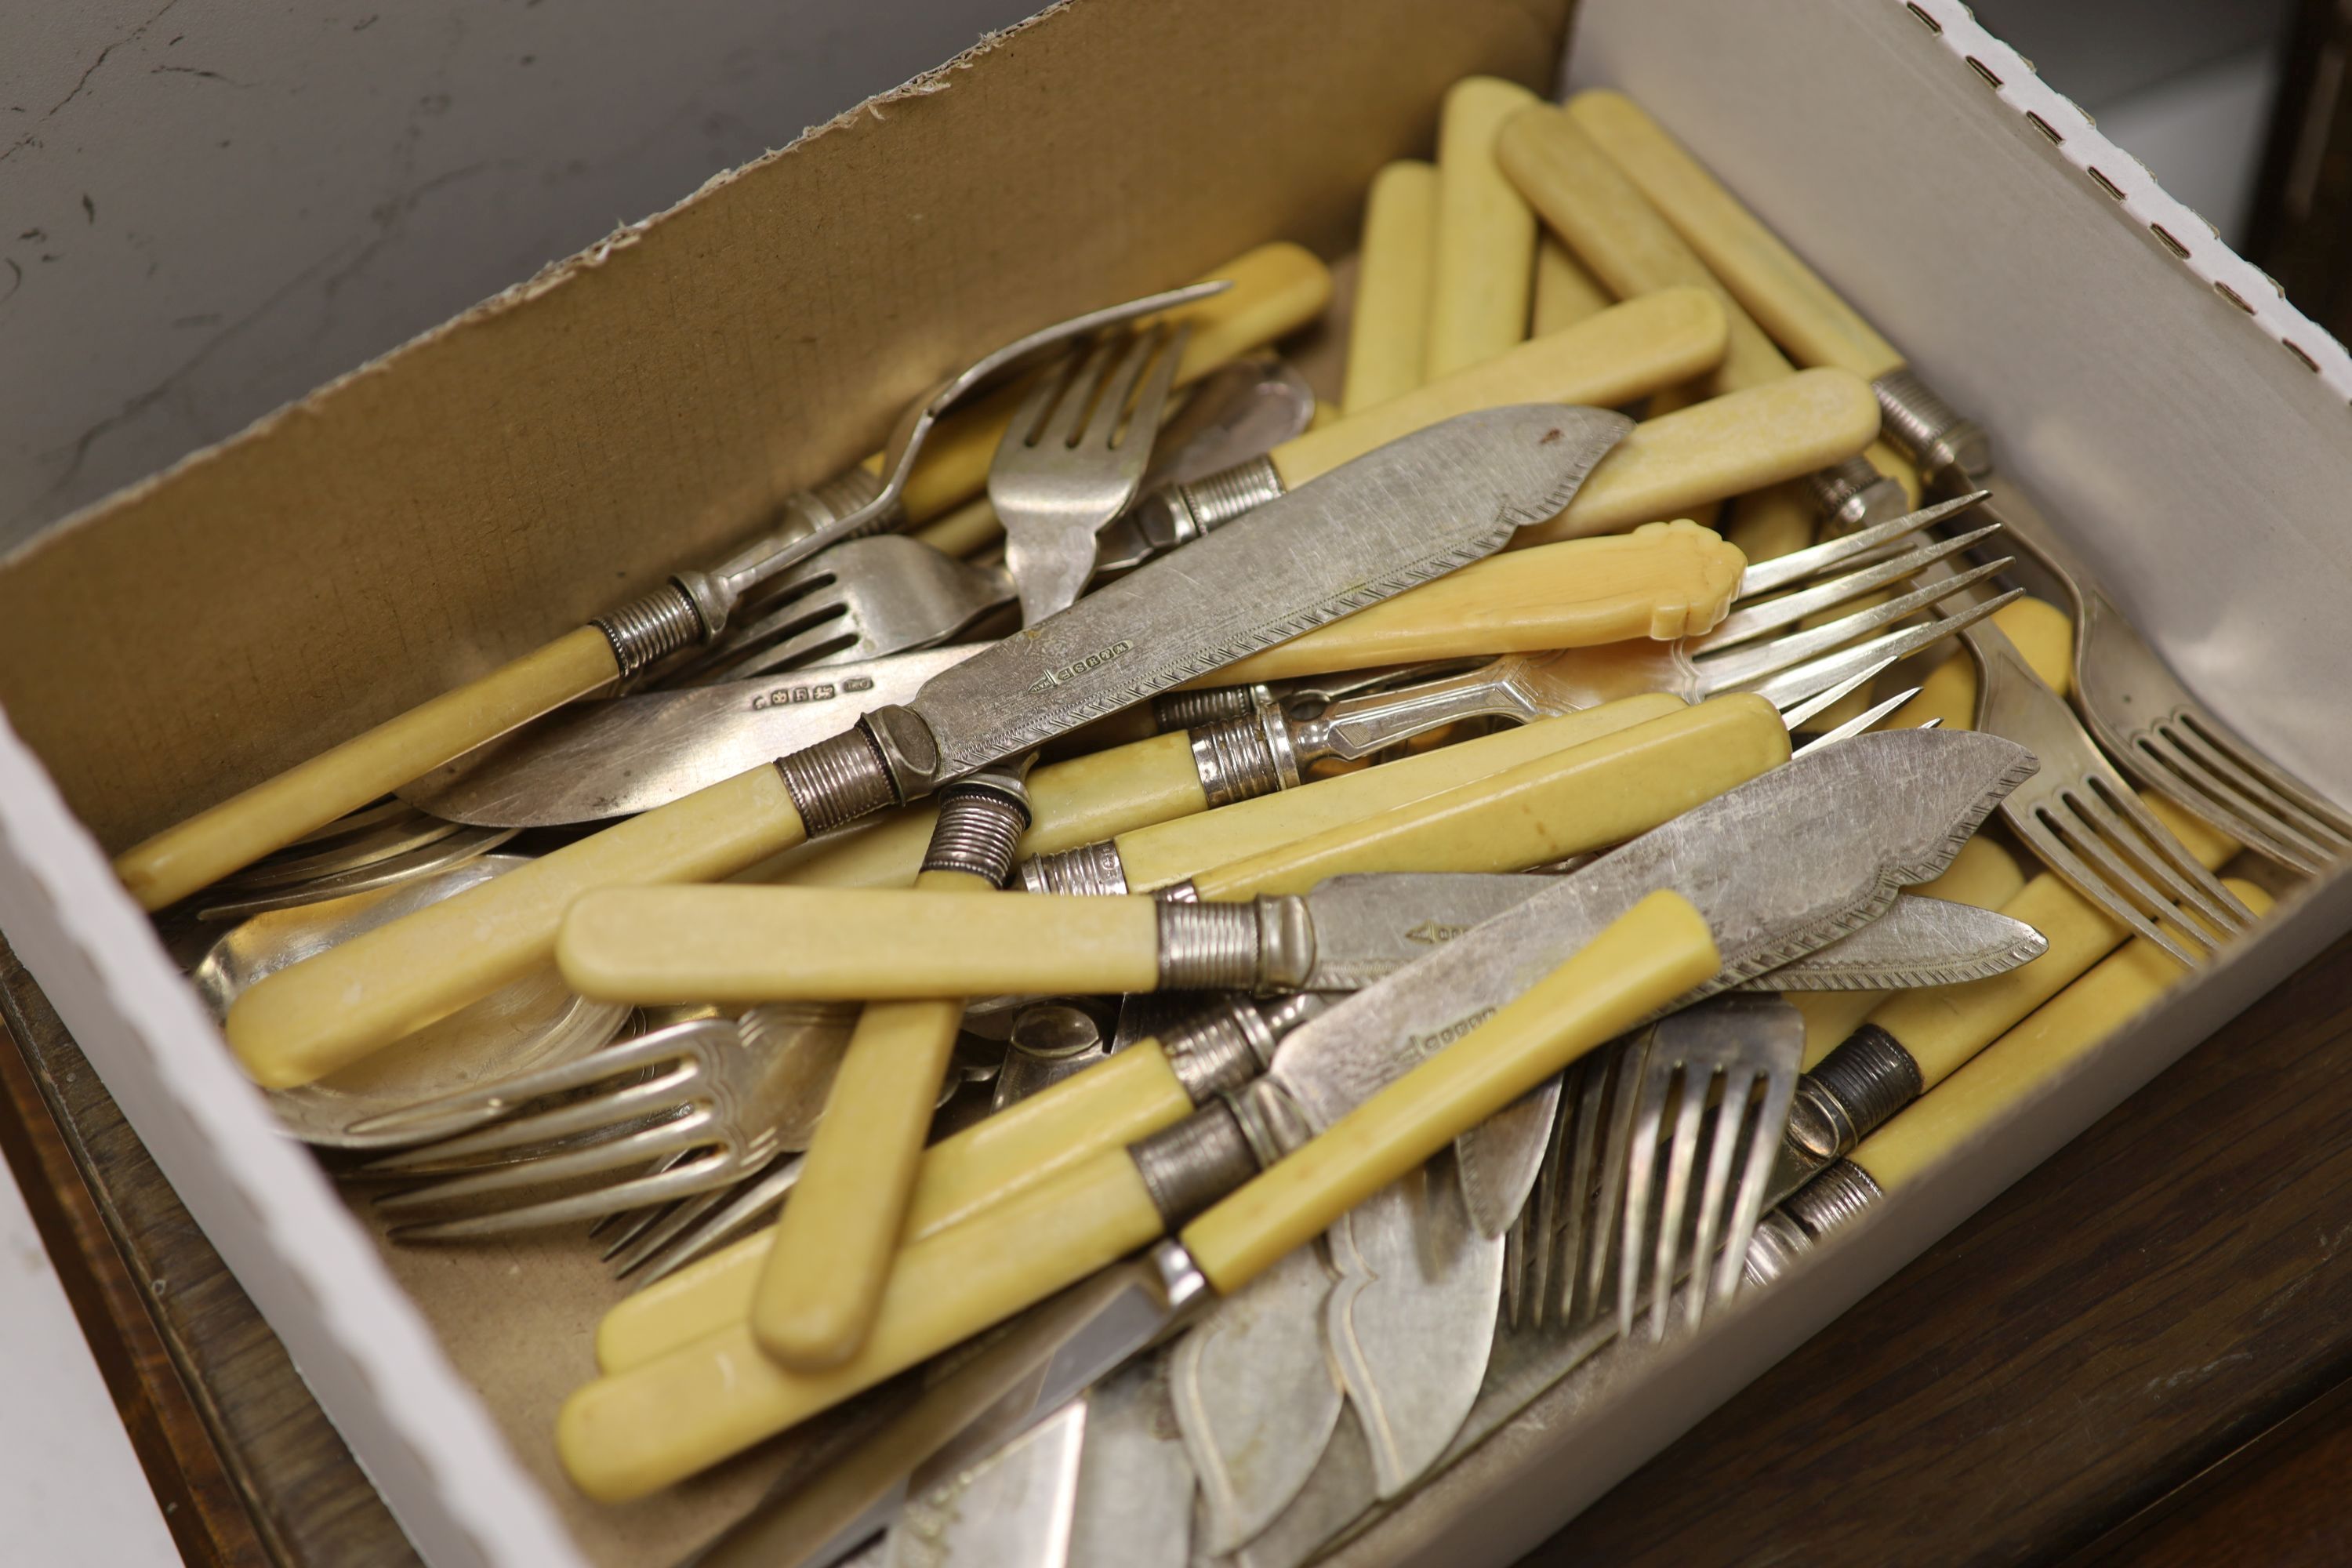 Three boxes of mixed fish eaters and flatware and two boxes of silver teaspoons and silver knives and forks.